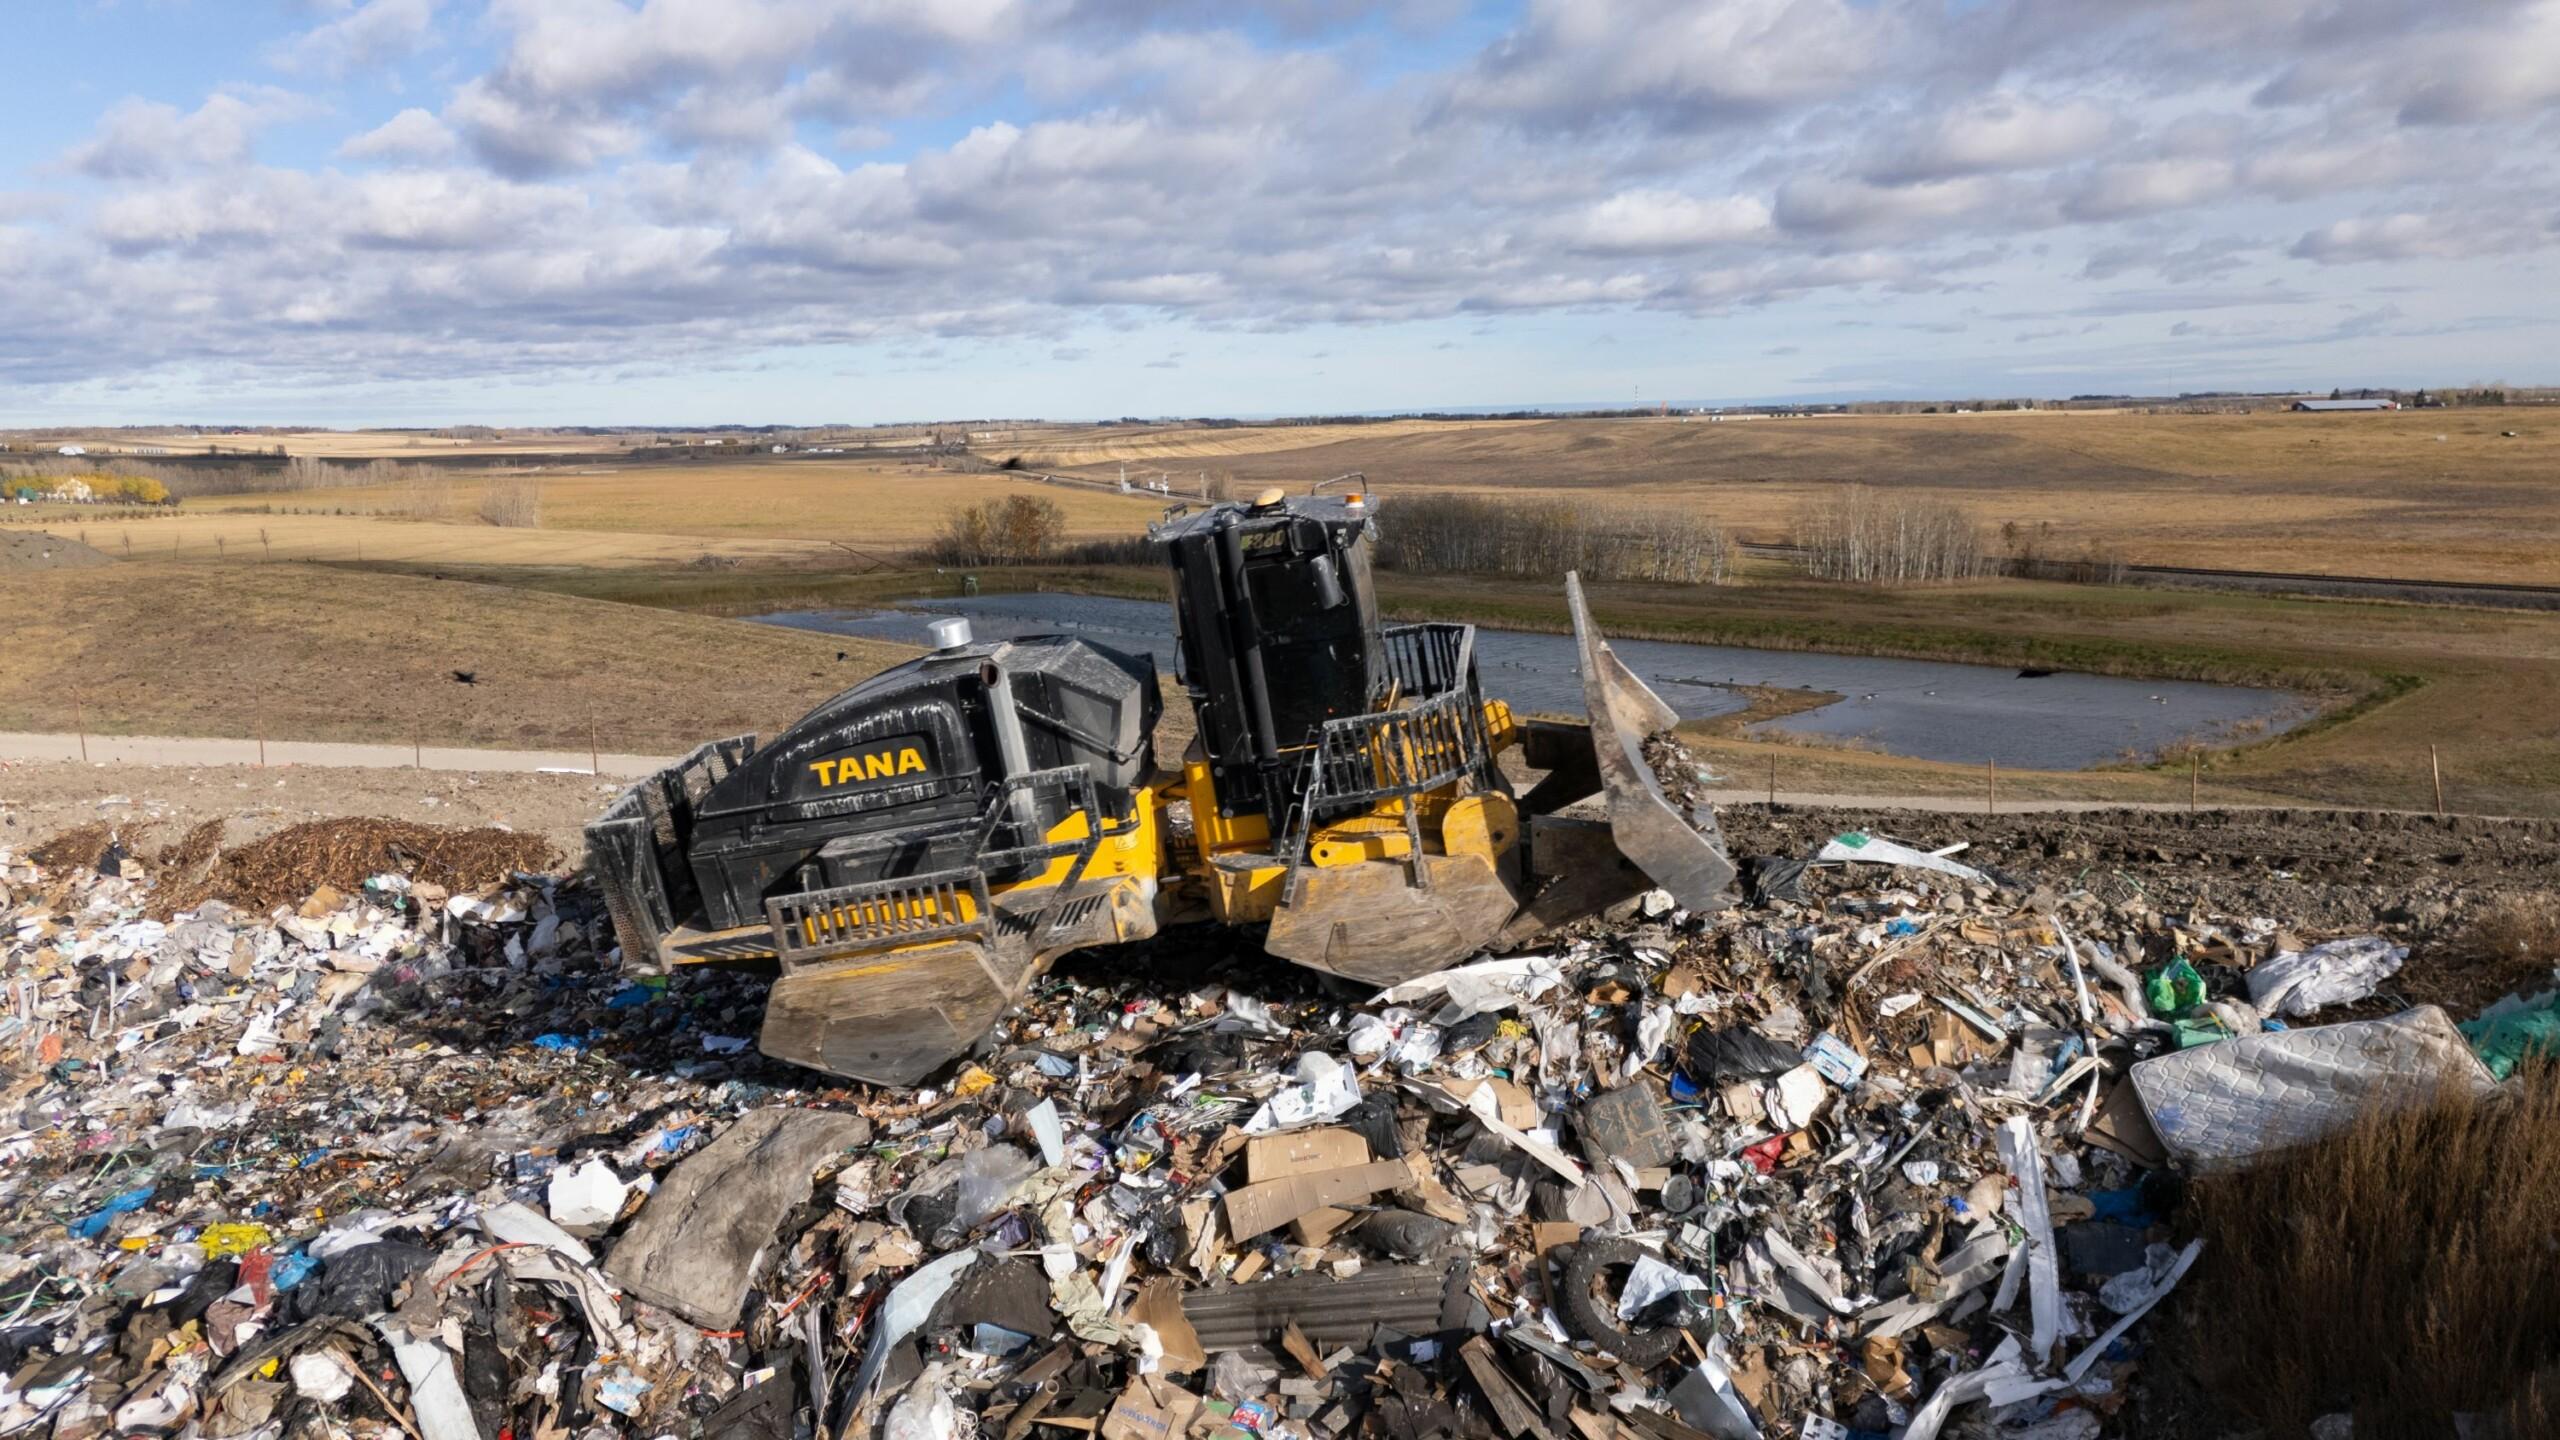 TANA landfill compactor compacting waste in landfill